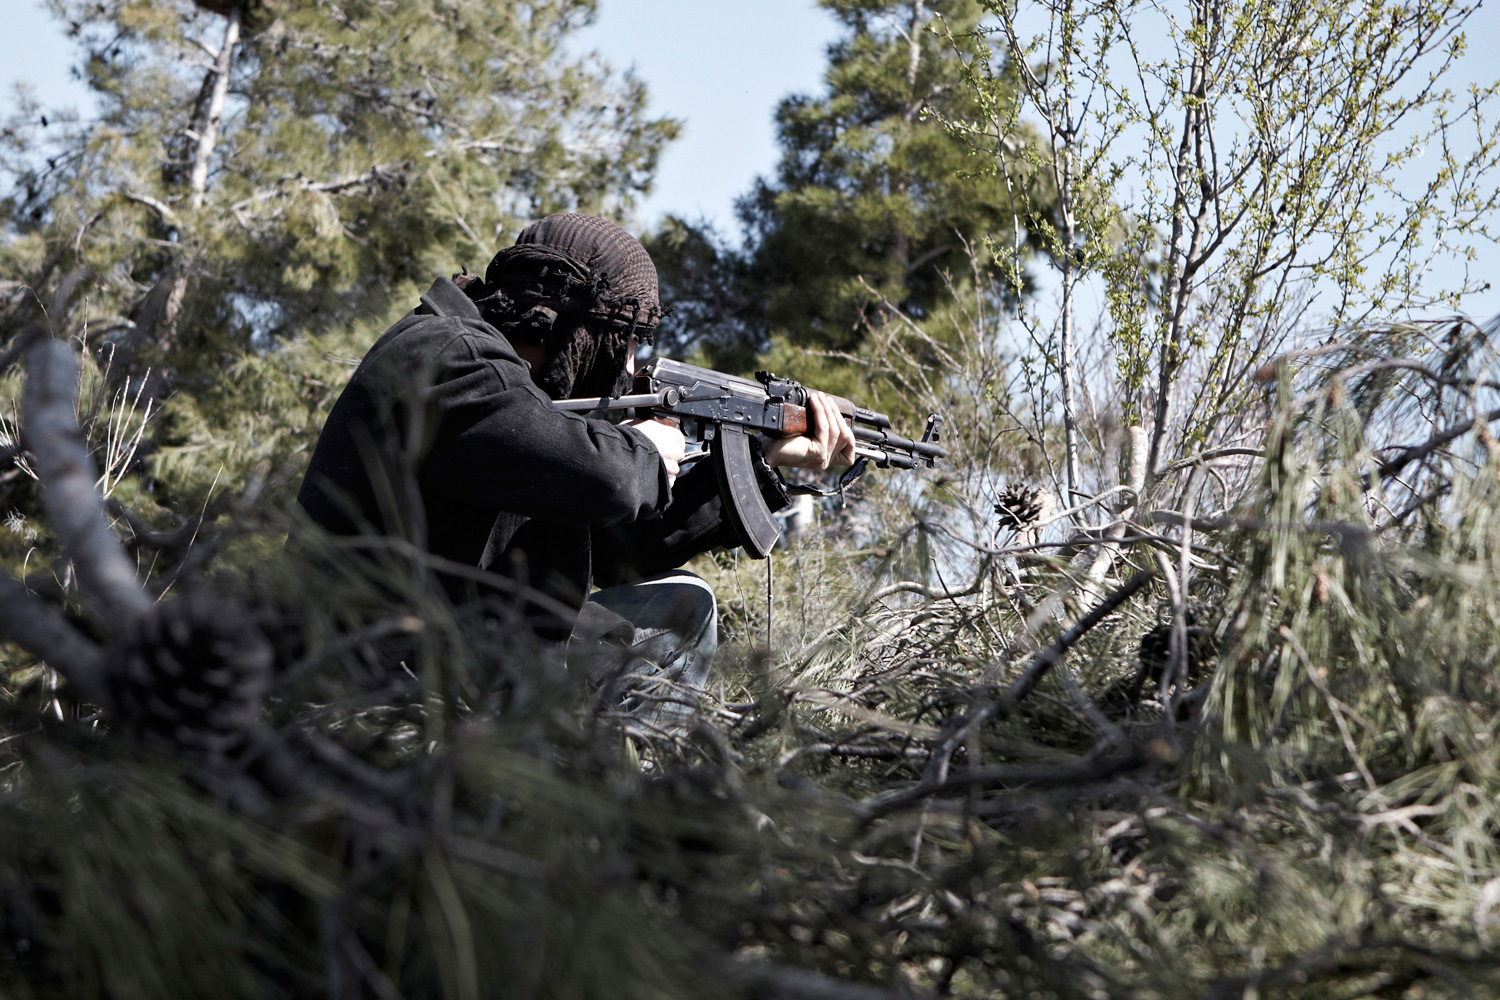 March 23, 2012. A Free Syrian Army member is on the lookout in Idlib, Syria.